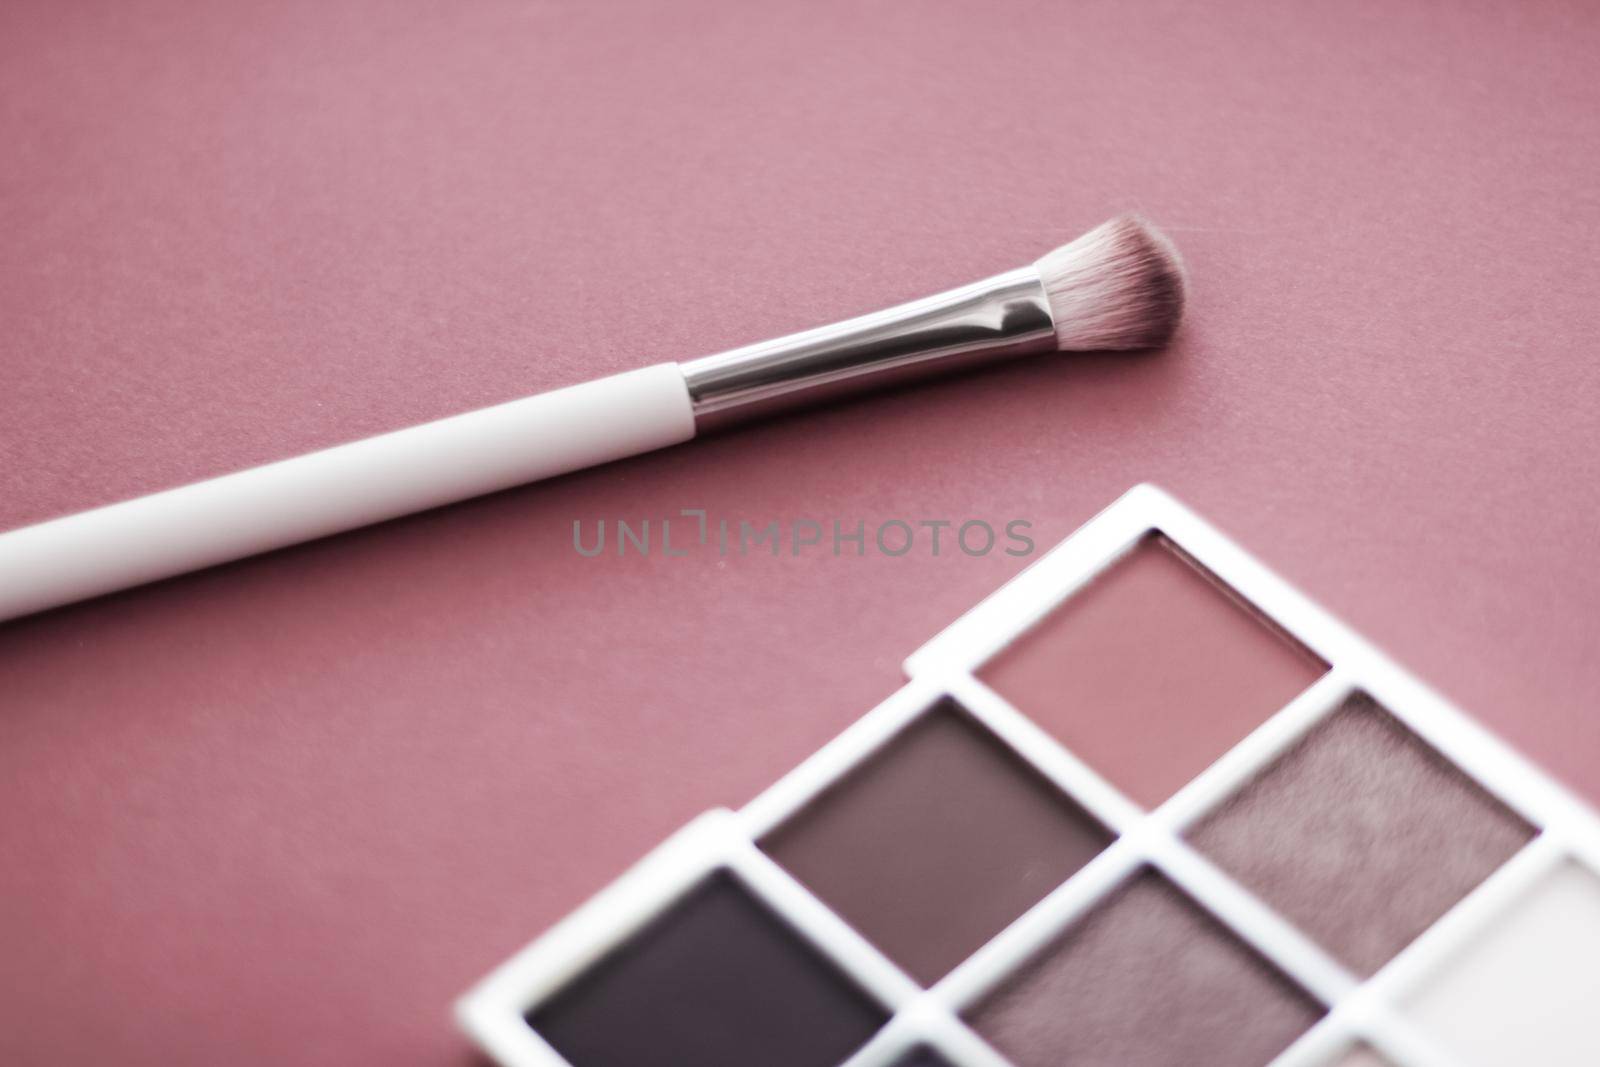 Cosmetic branding, mua and girly concept - Eyeshadow palette and make-up brush on rouge background, eye shadows cosmetics product for luxury beauty brand promotion and holiday fashion blog design